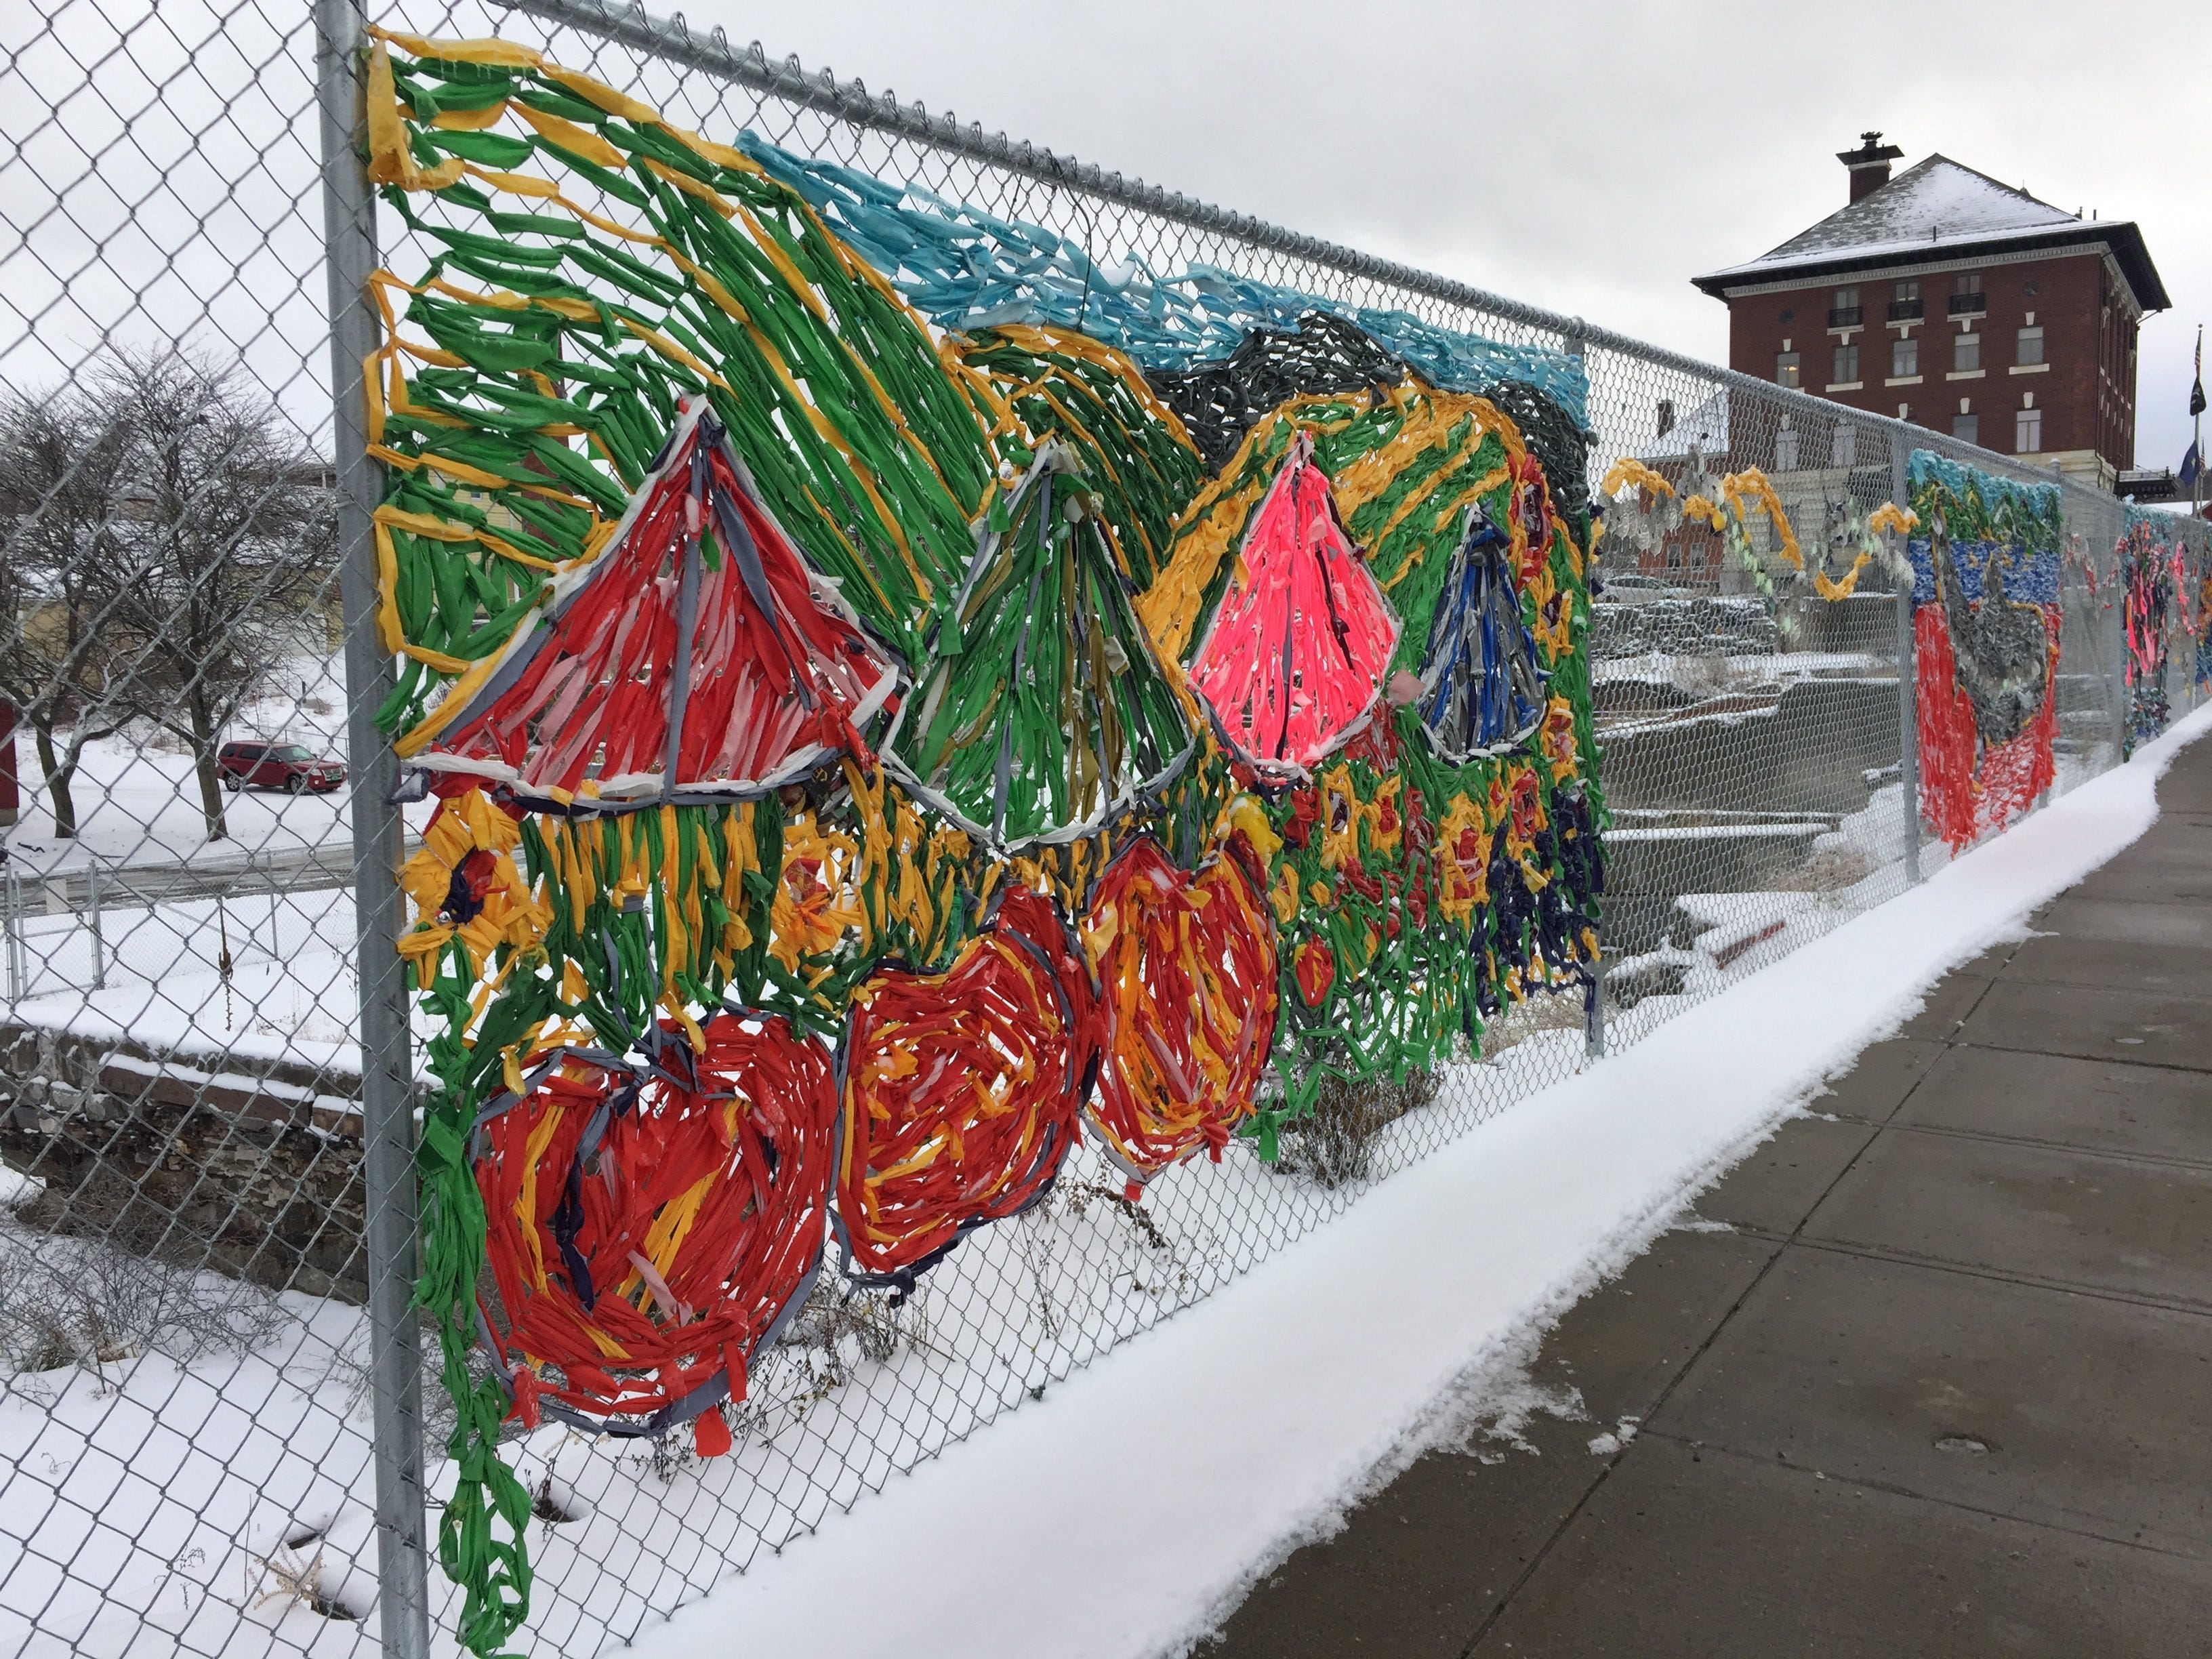 A group of Newport residents took it upon themselves to brighten the fence surrounding a failed EB-5 project downtown.